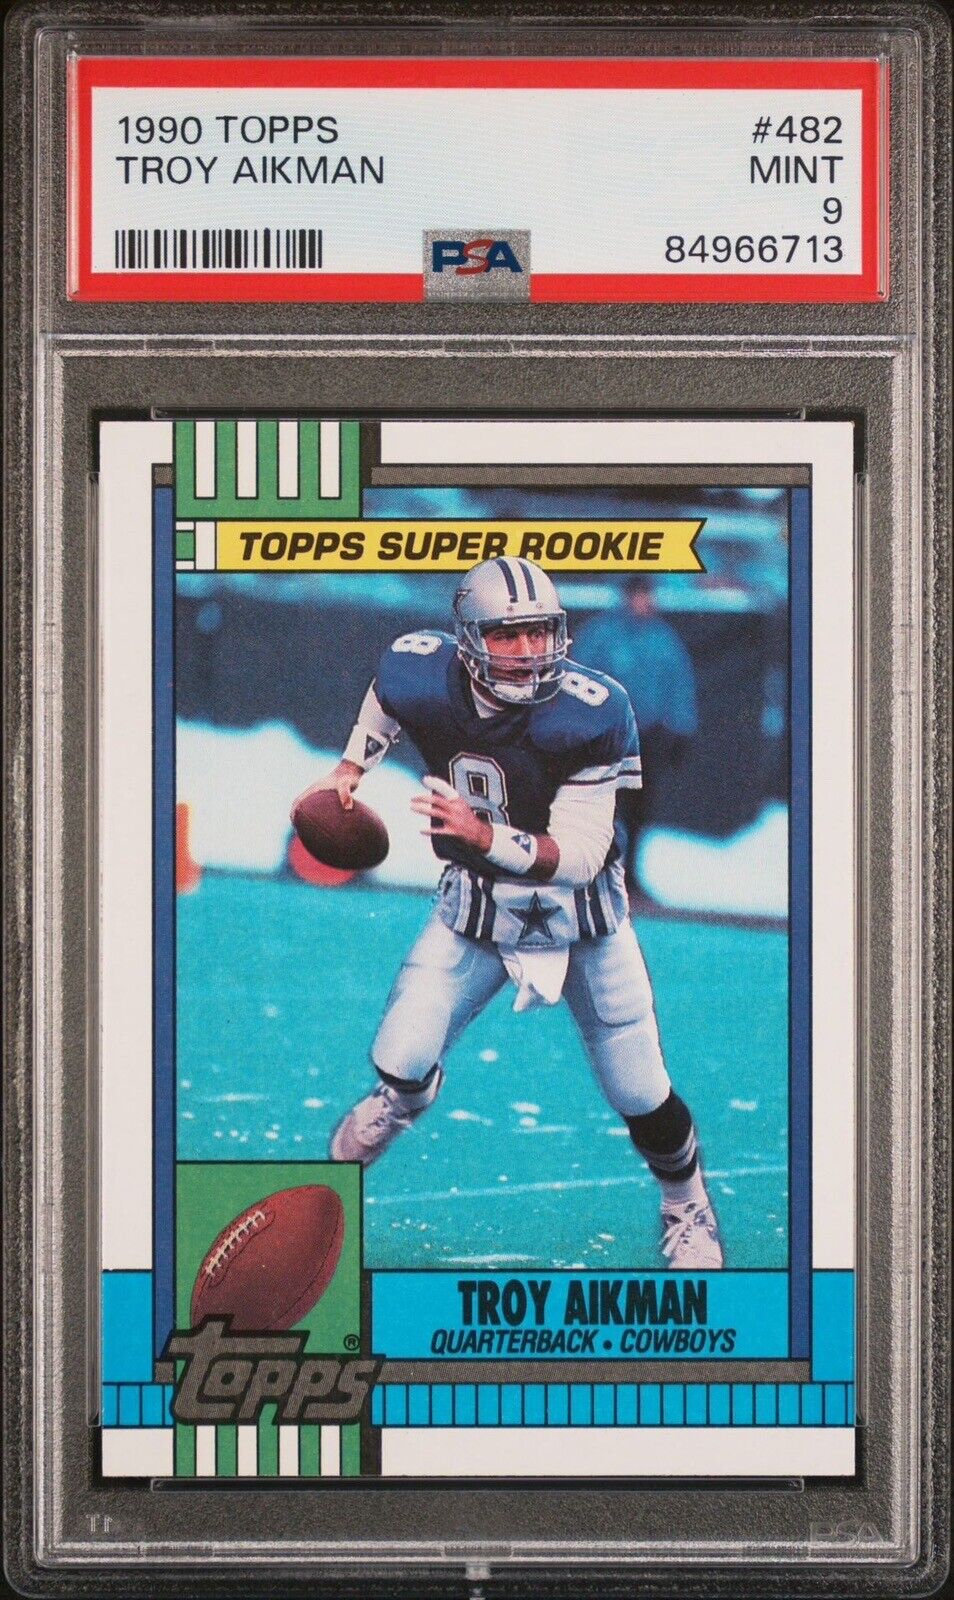 Troy Aikman 1990 Topps Super Rookie PSA Graded 9 #482 Cowboys